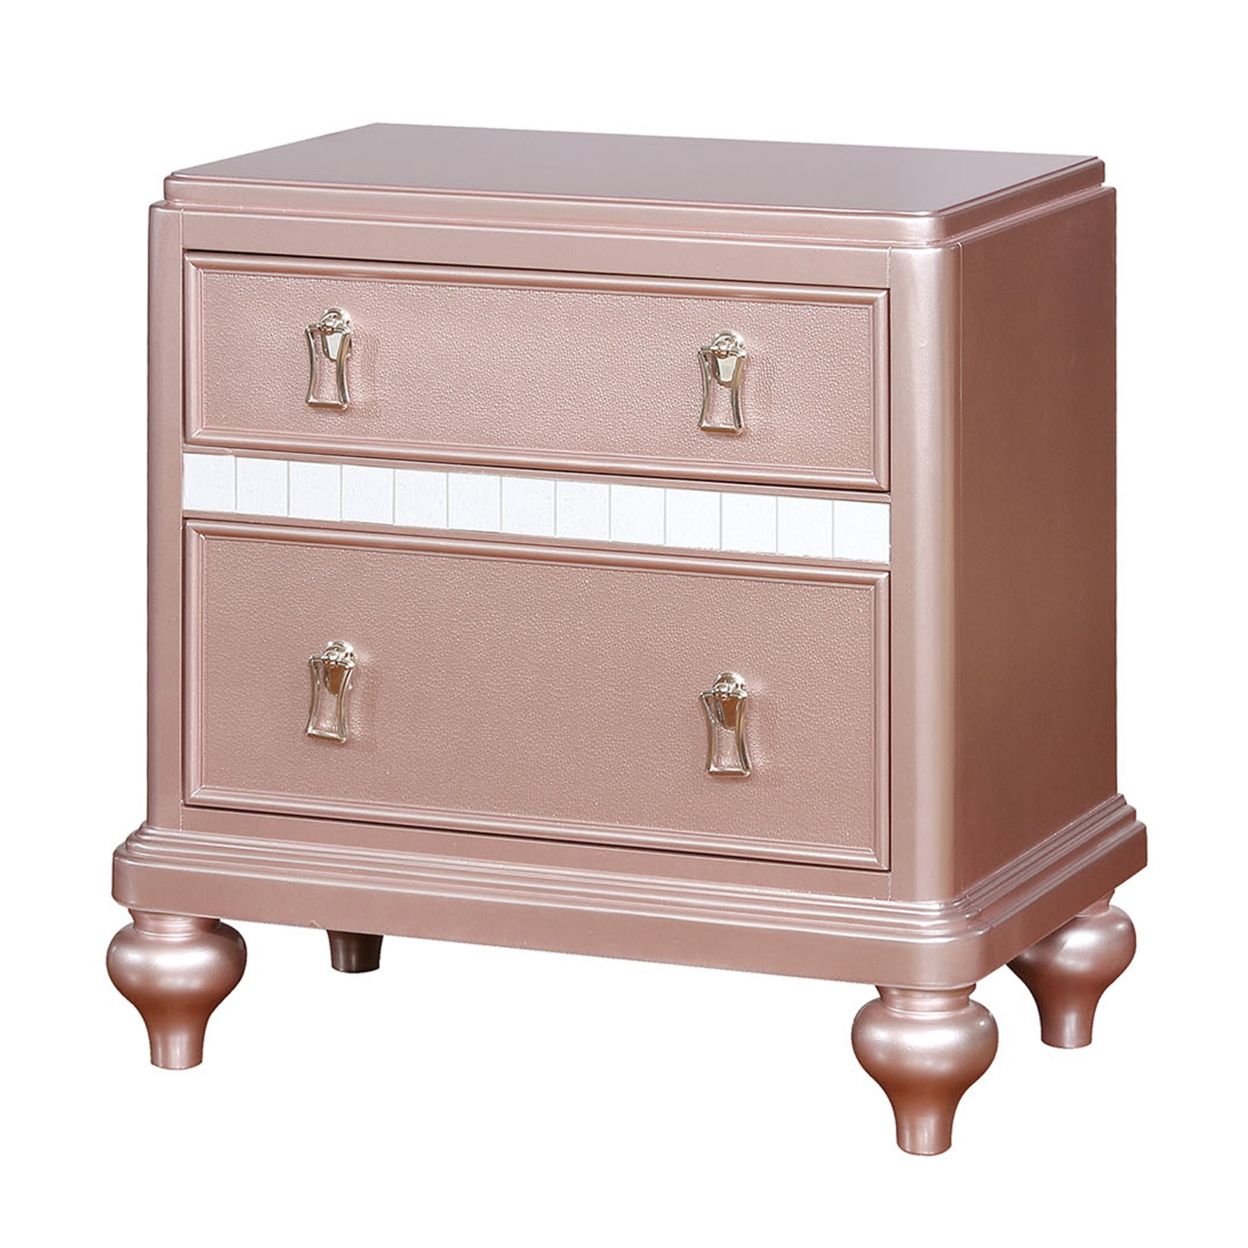 Contemporary Solid Wood Night Stand With Mirror Trim, Pink- Saltoro Sherpi